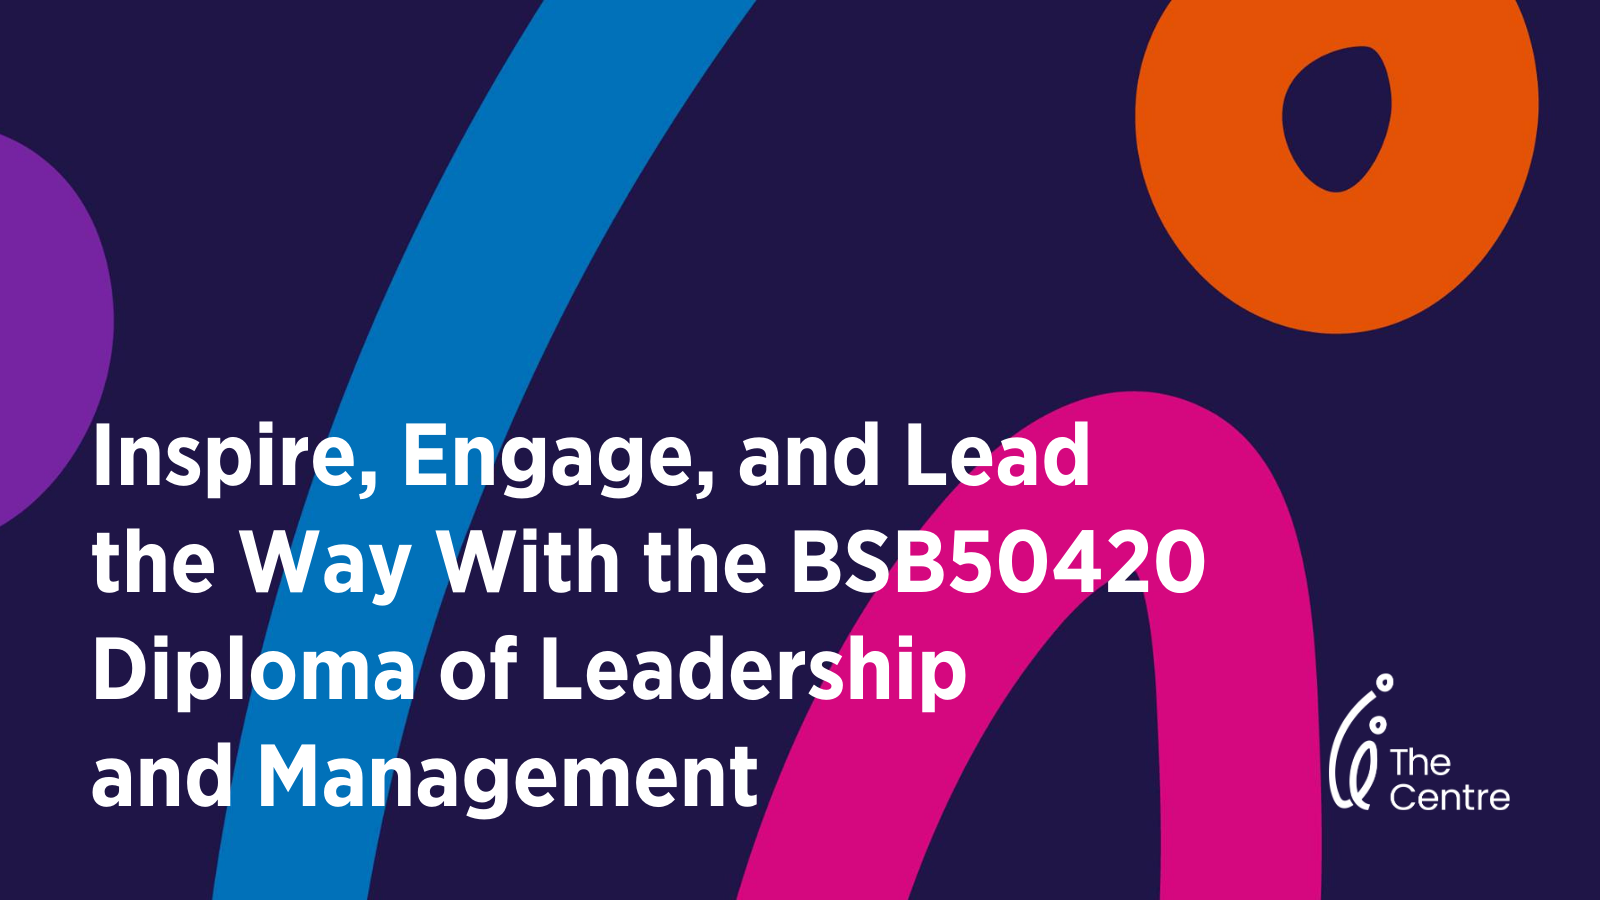 Inspire, Engage, and Lead the way with the BSB50420 Diploma of Leadership and Management